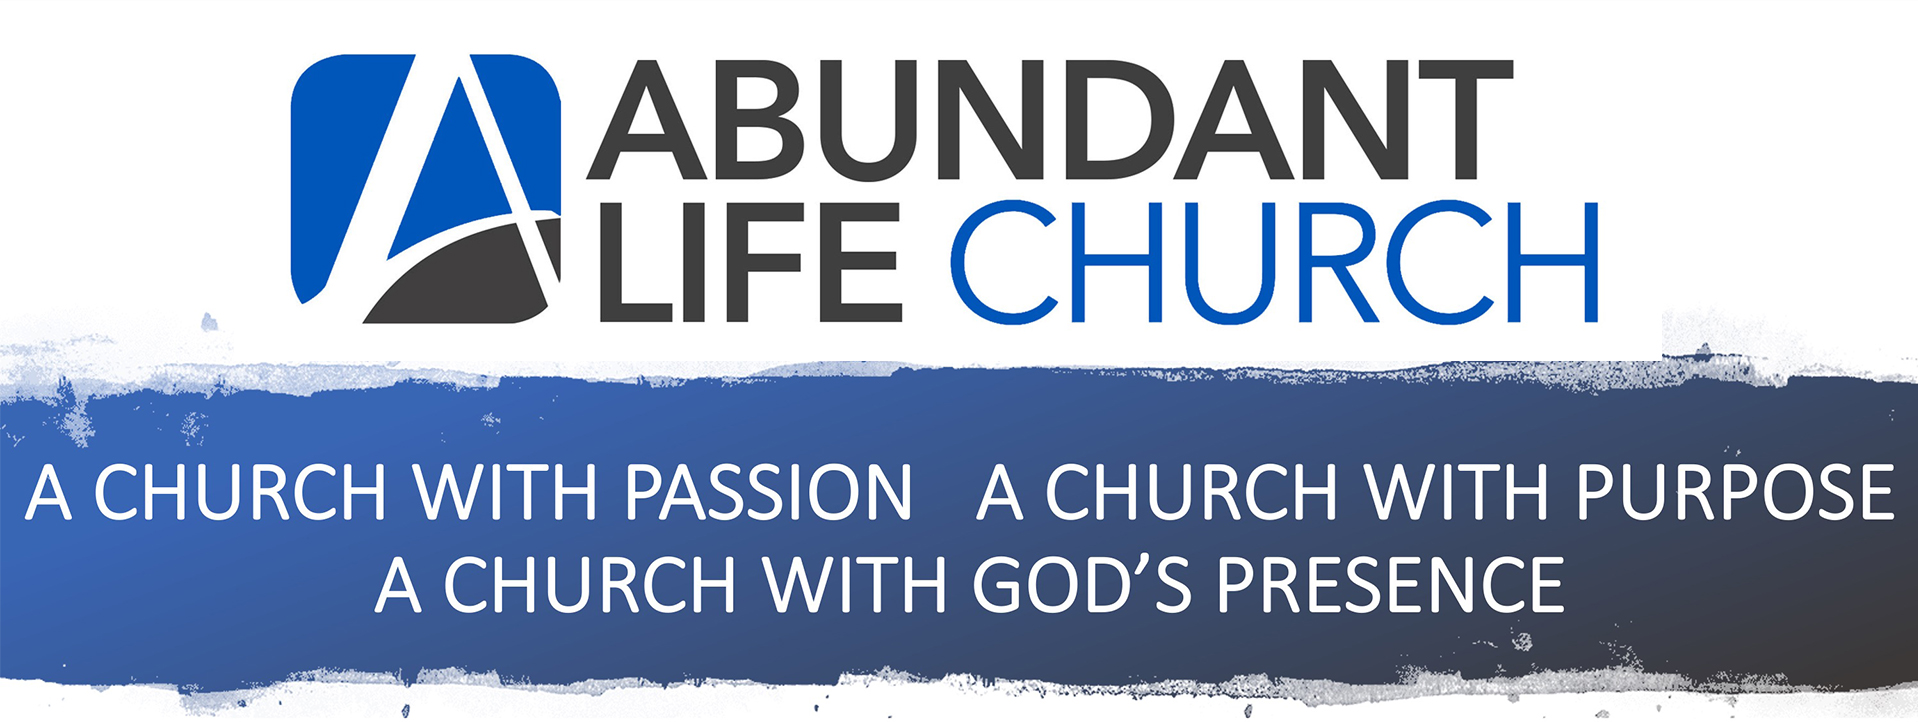 We are a church with passion, purpose, and God's presence!